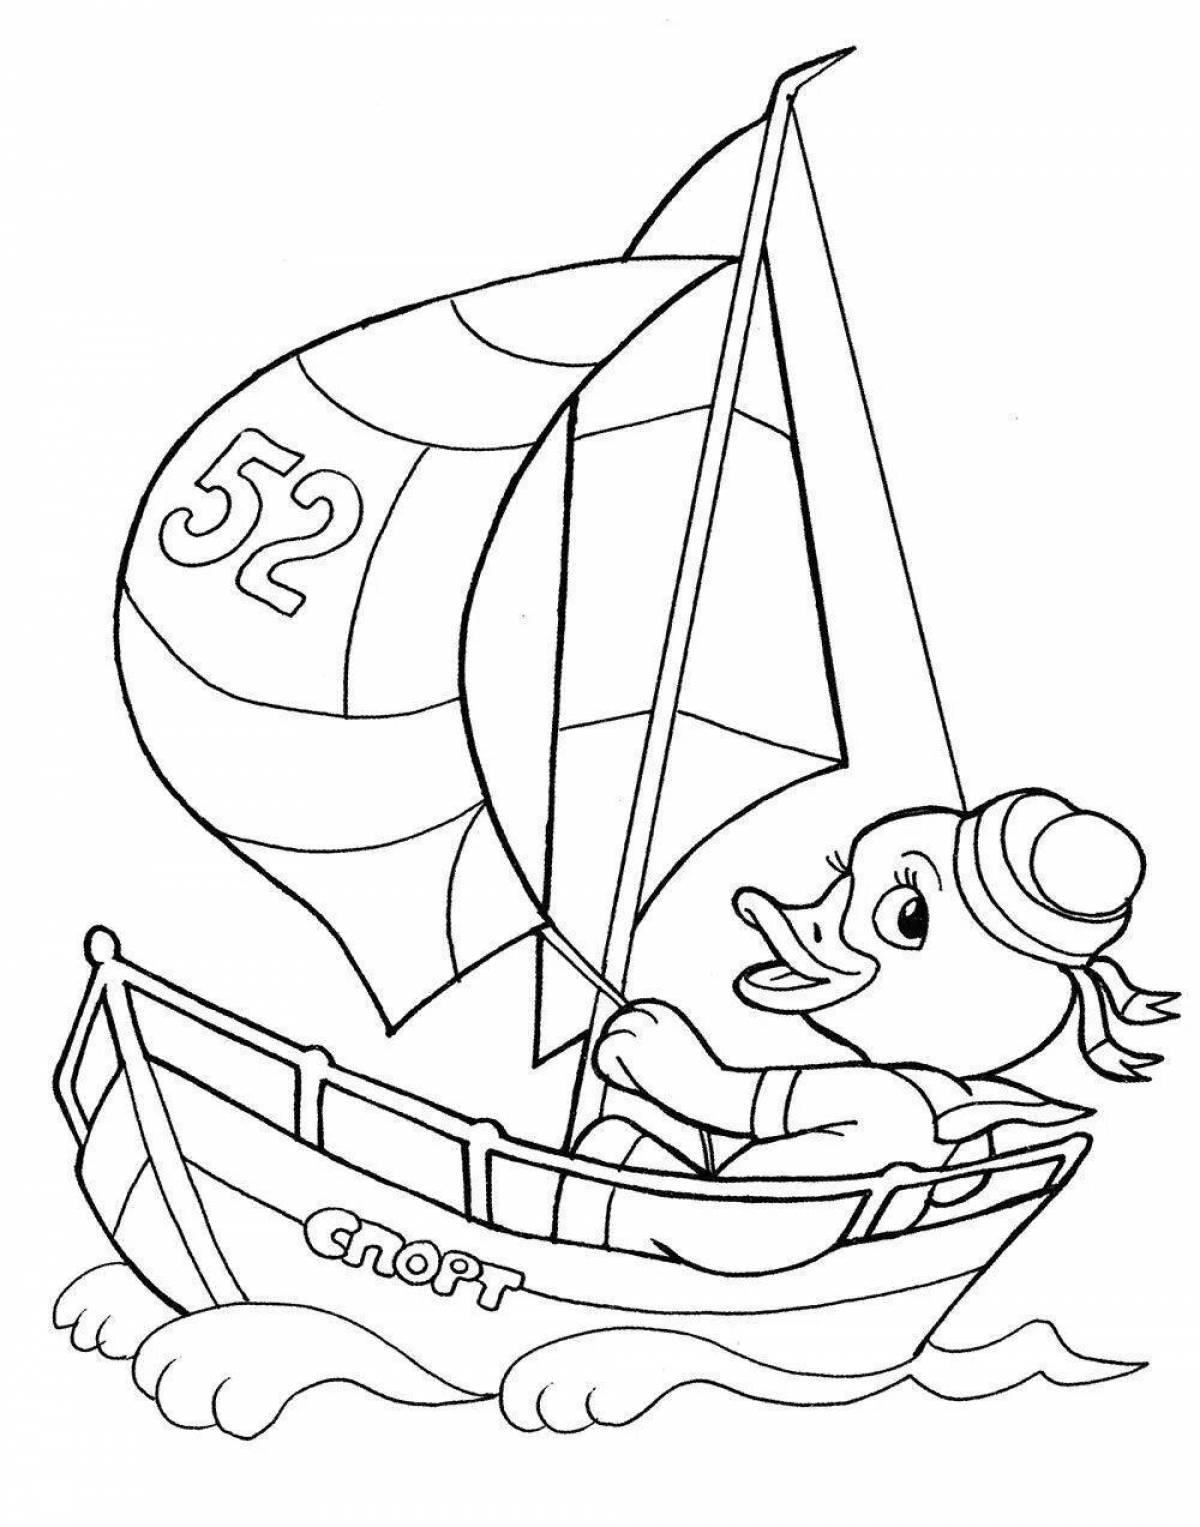 Comic coloring page 5 6